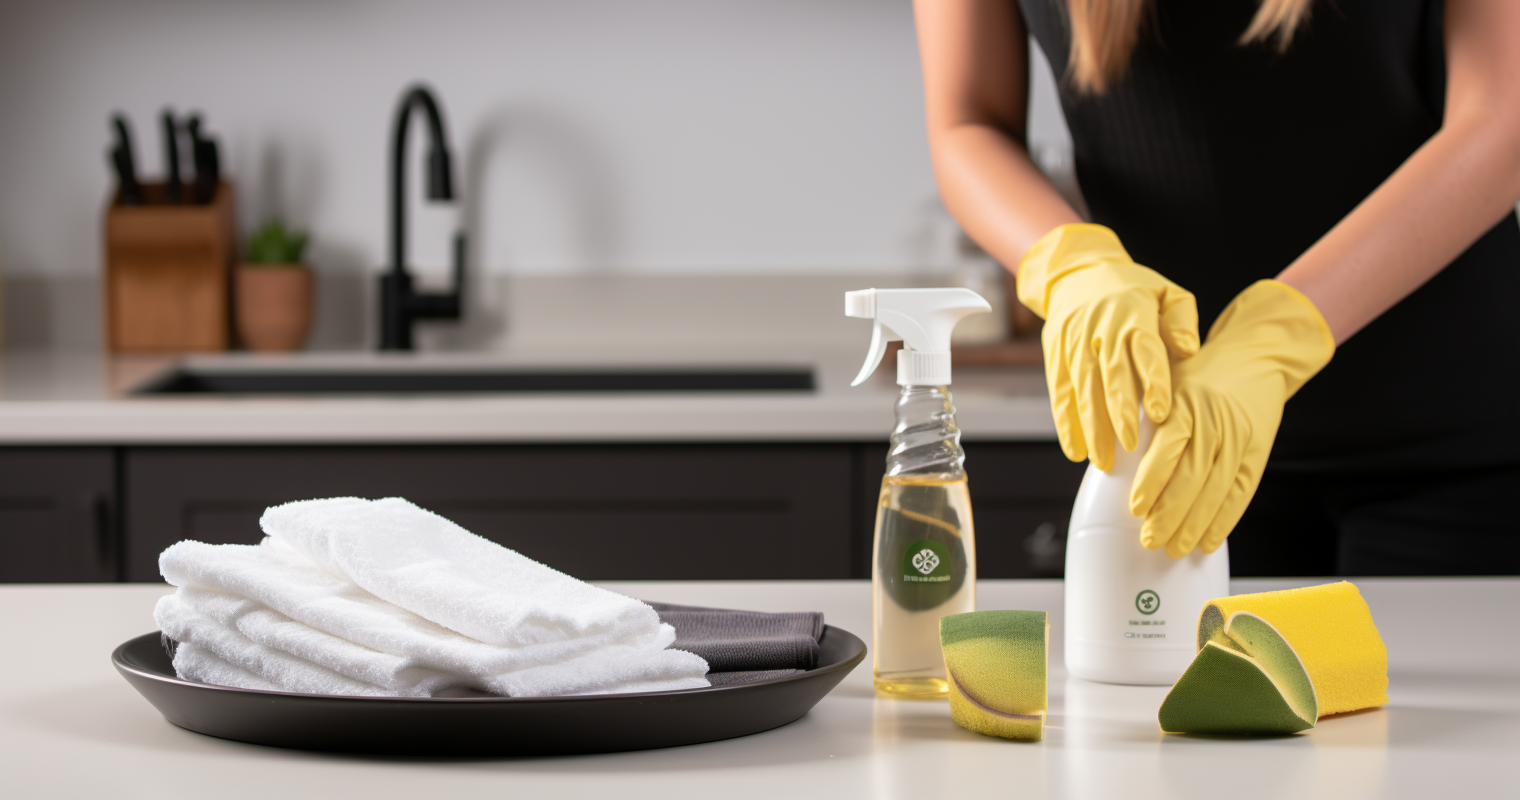 Cleaning Kitchen Countertops with Labeled Products